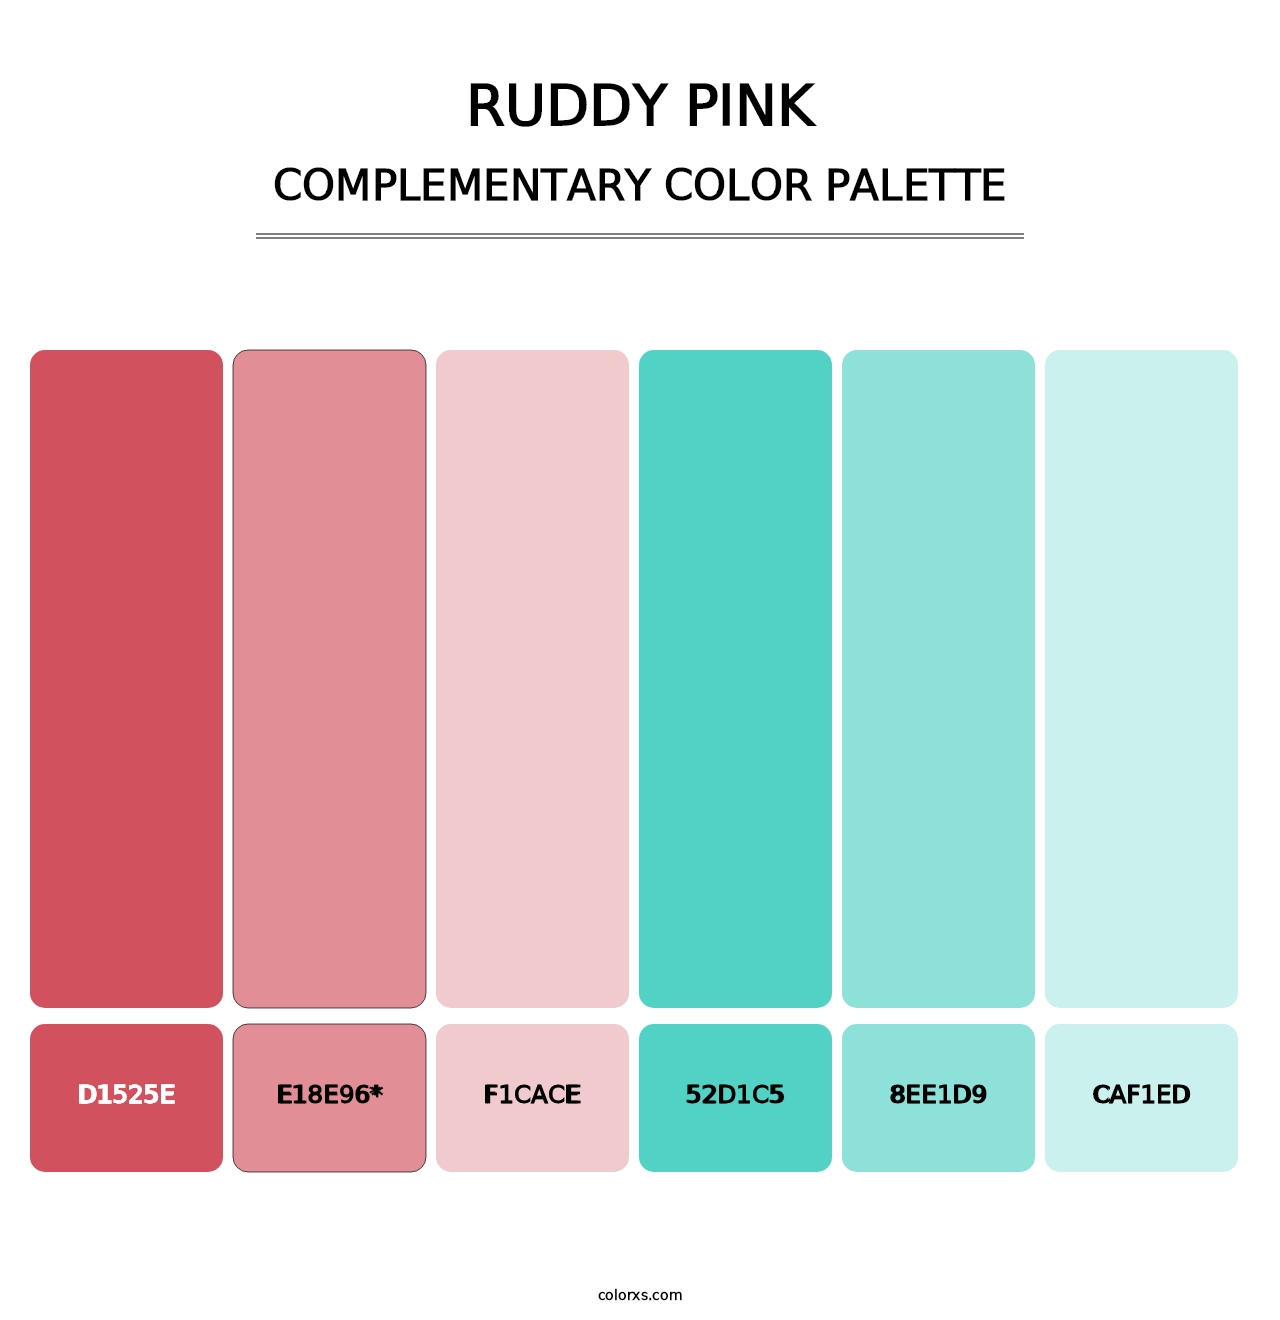 Ruddy Pink - Complementary Color Palette